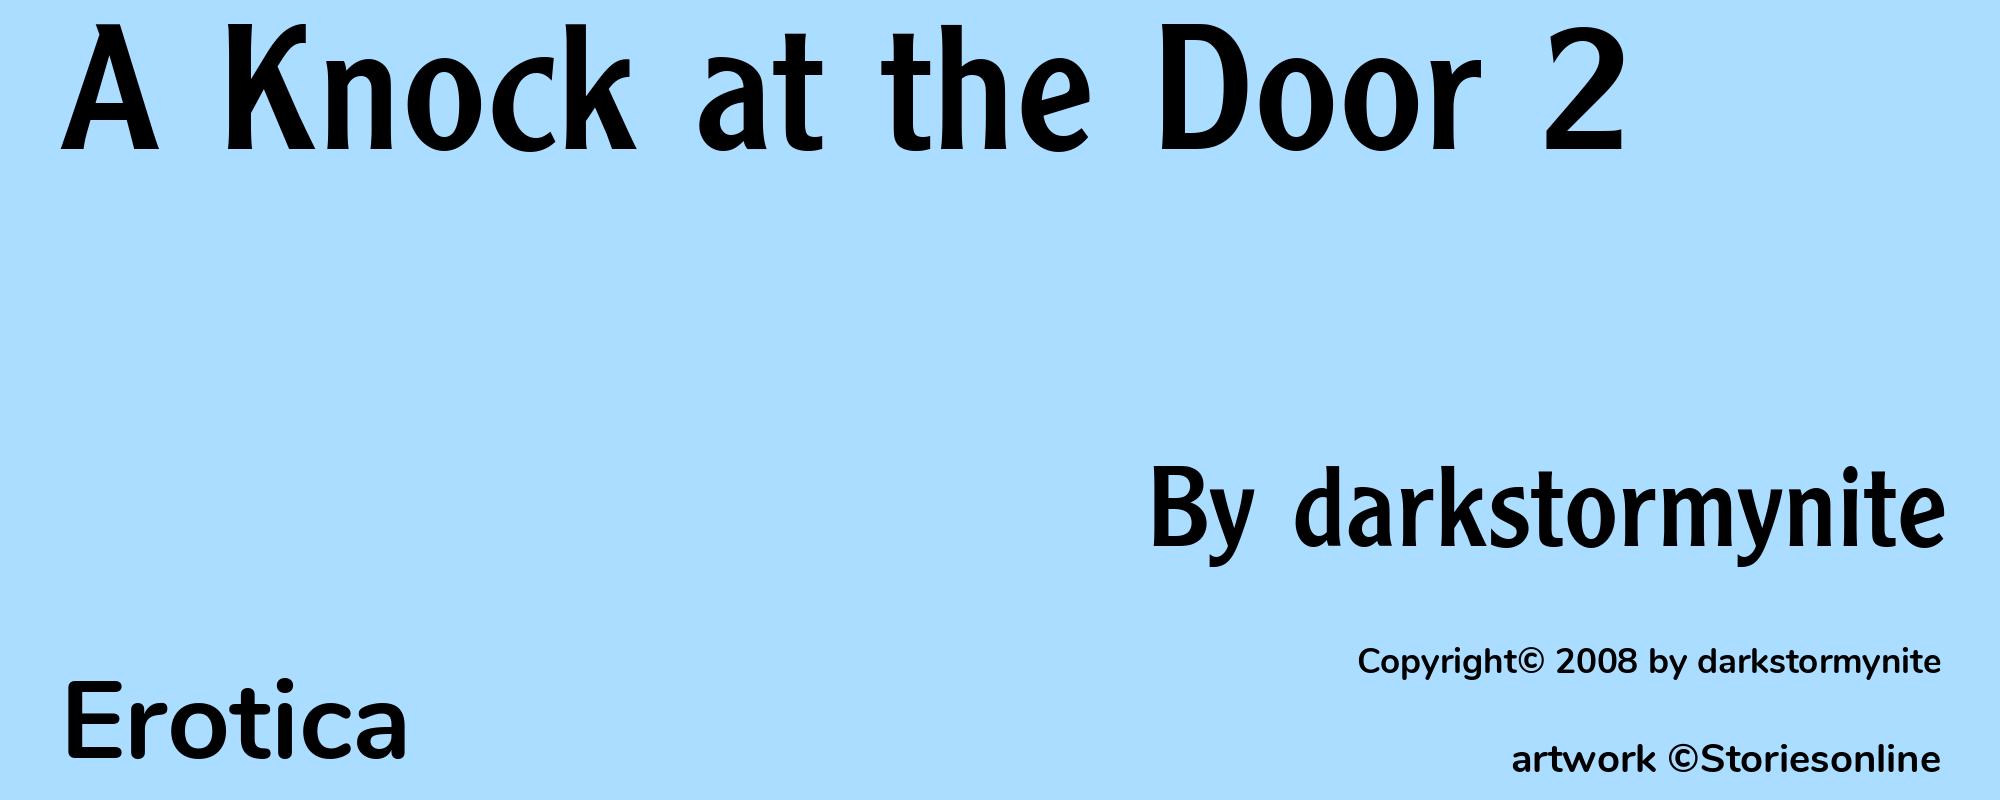 A Knock at the Door 2 - Cover